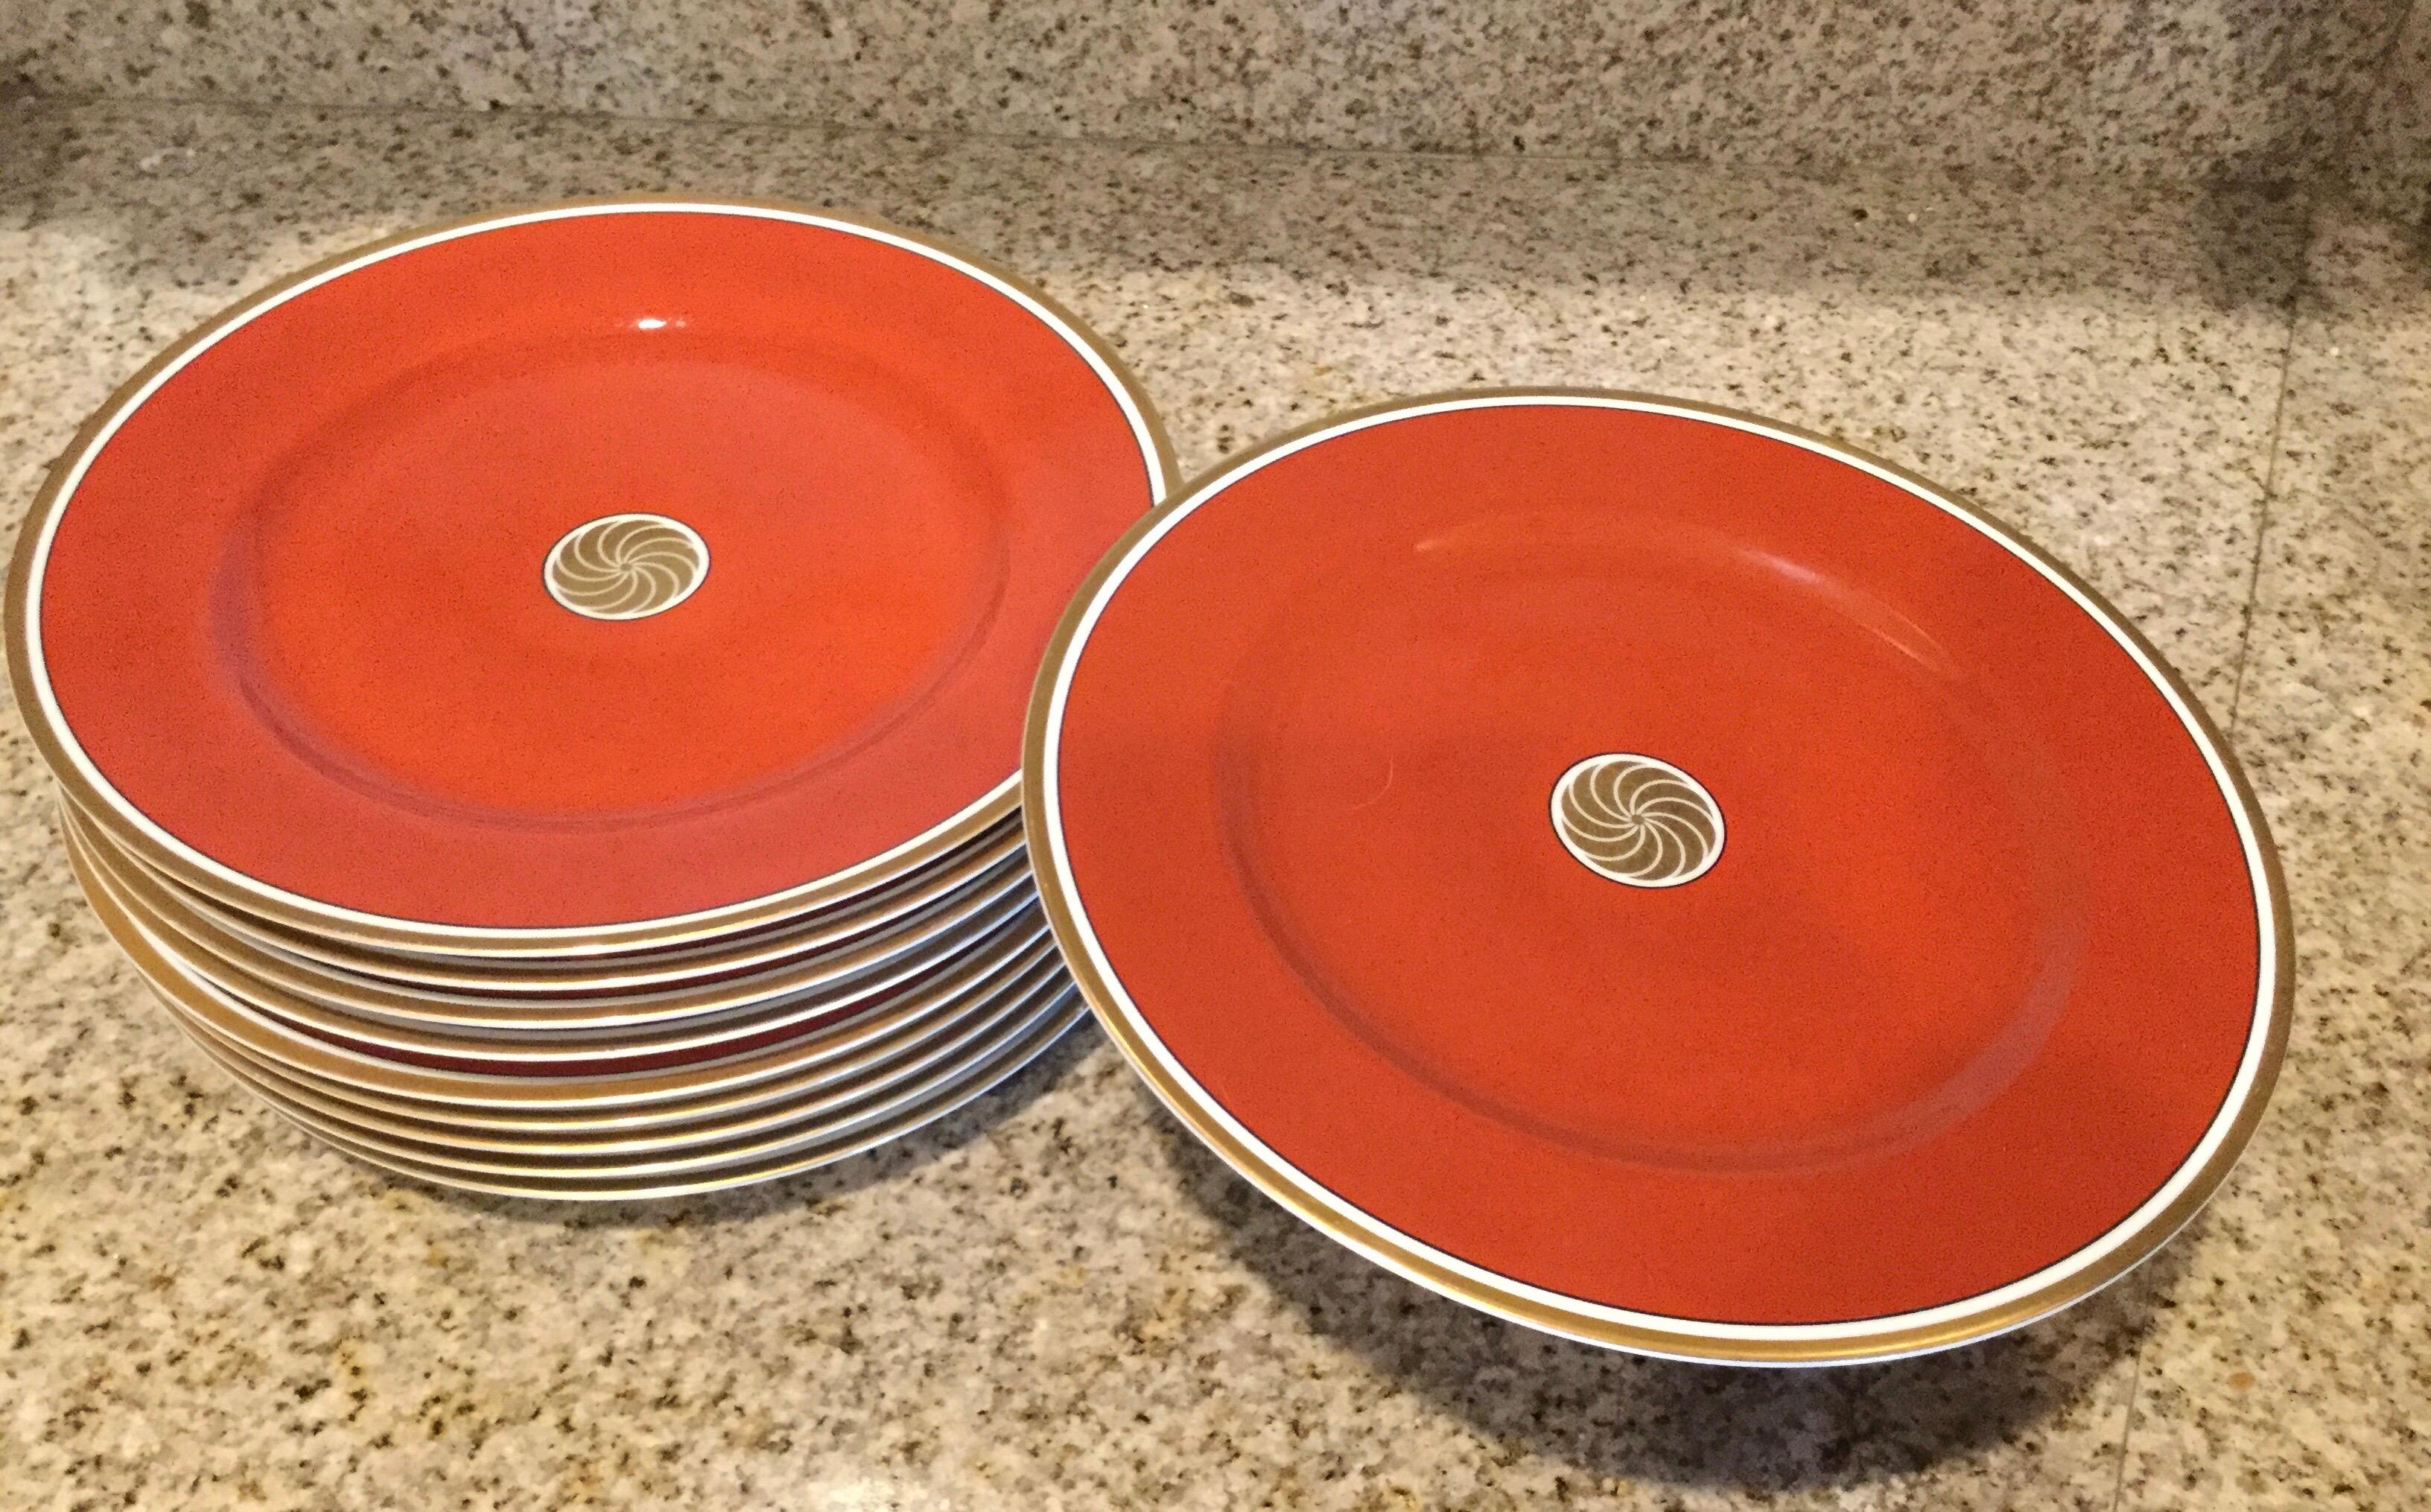 Set of 10 dinner plates. This is part of a huge set recently acquired from my multimillion dollar Palm Springs estate. Purchased in 1979 this Medallion d’Or pattern is considered one of Fitz and Floyd’s most chic and highly sought after patterns.